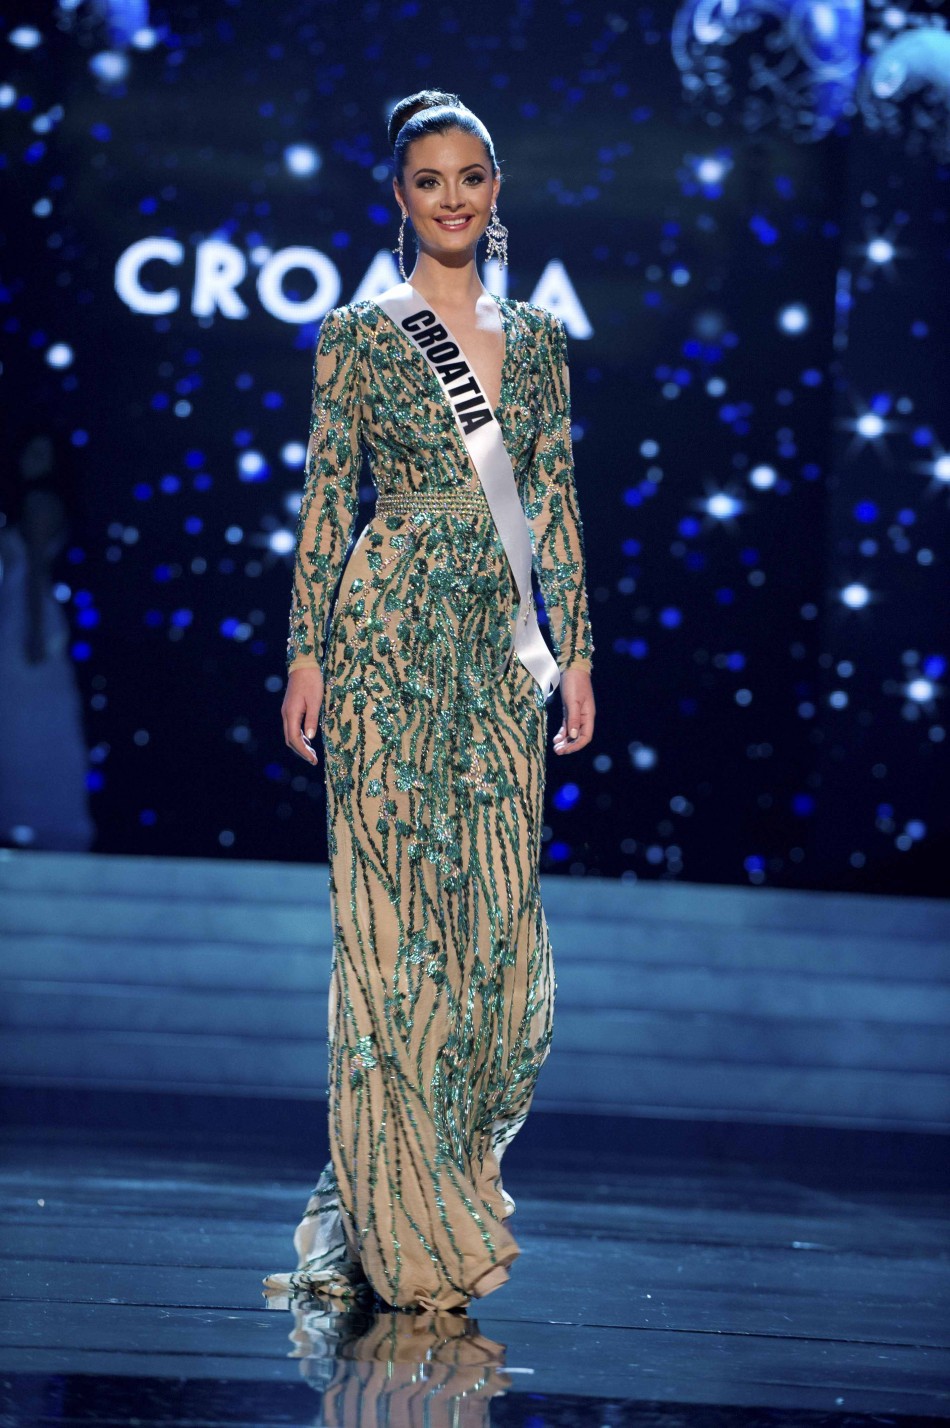 Miss Croatia 2012 Burg competes during the 2012 Miss Universe Presentation Show in Las Vegas